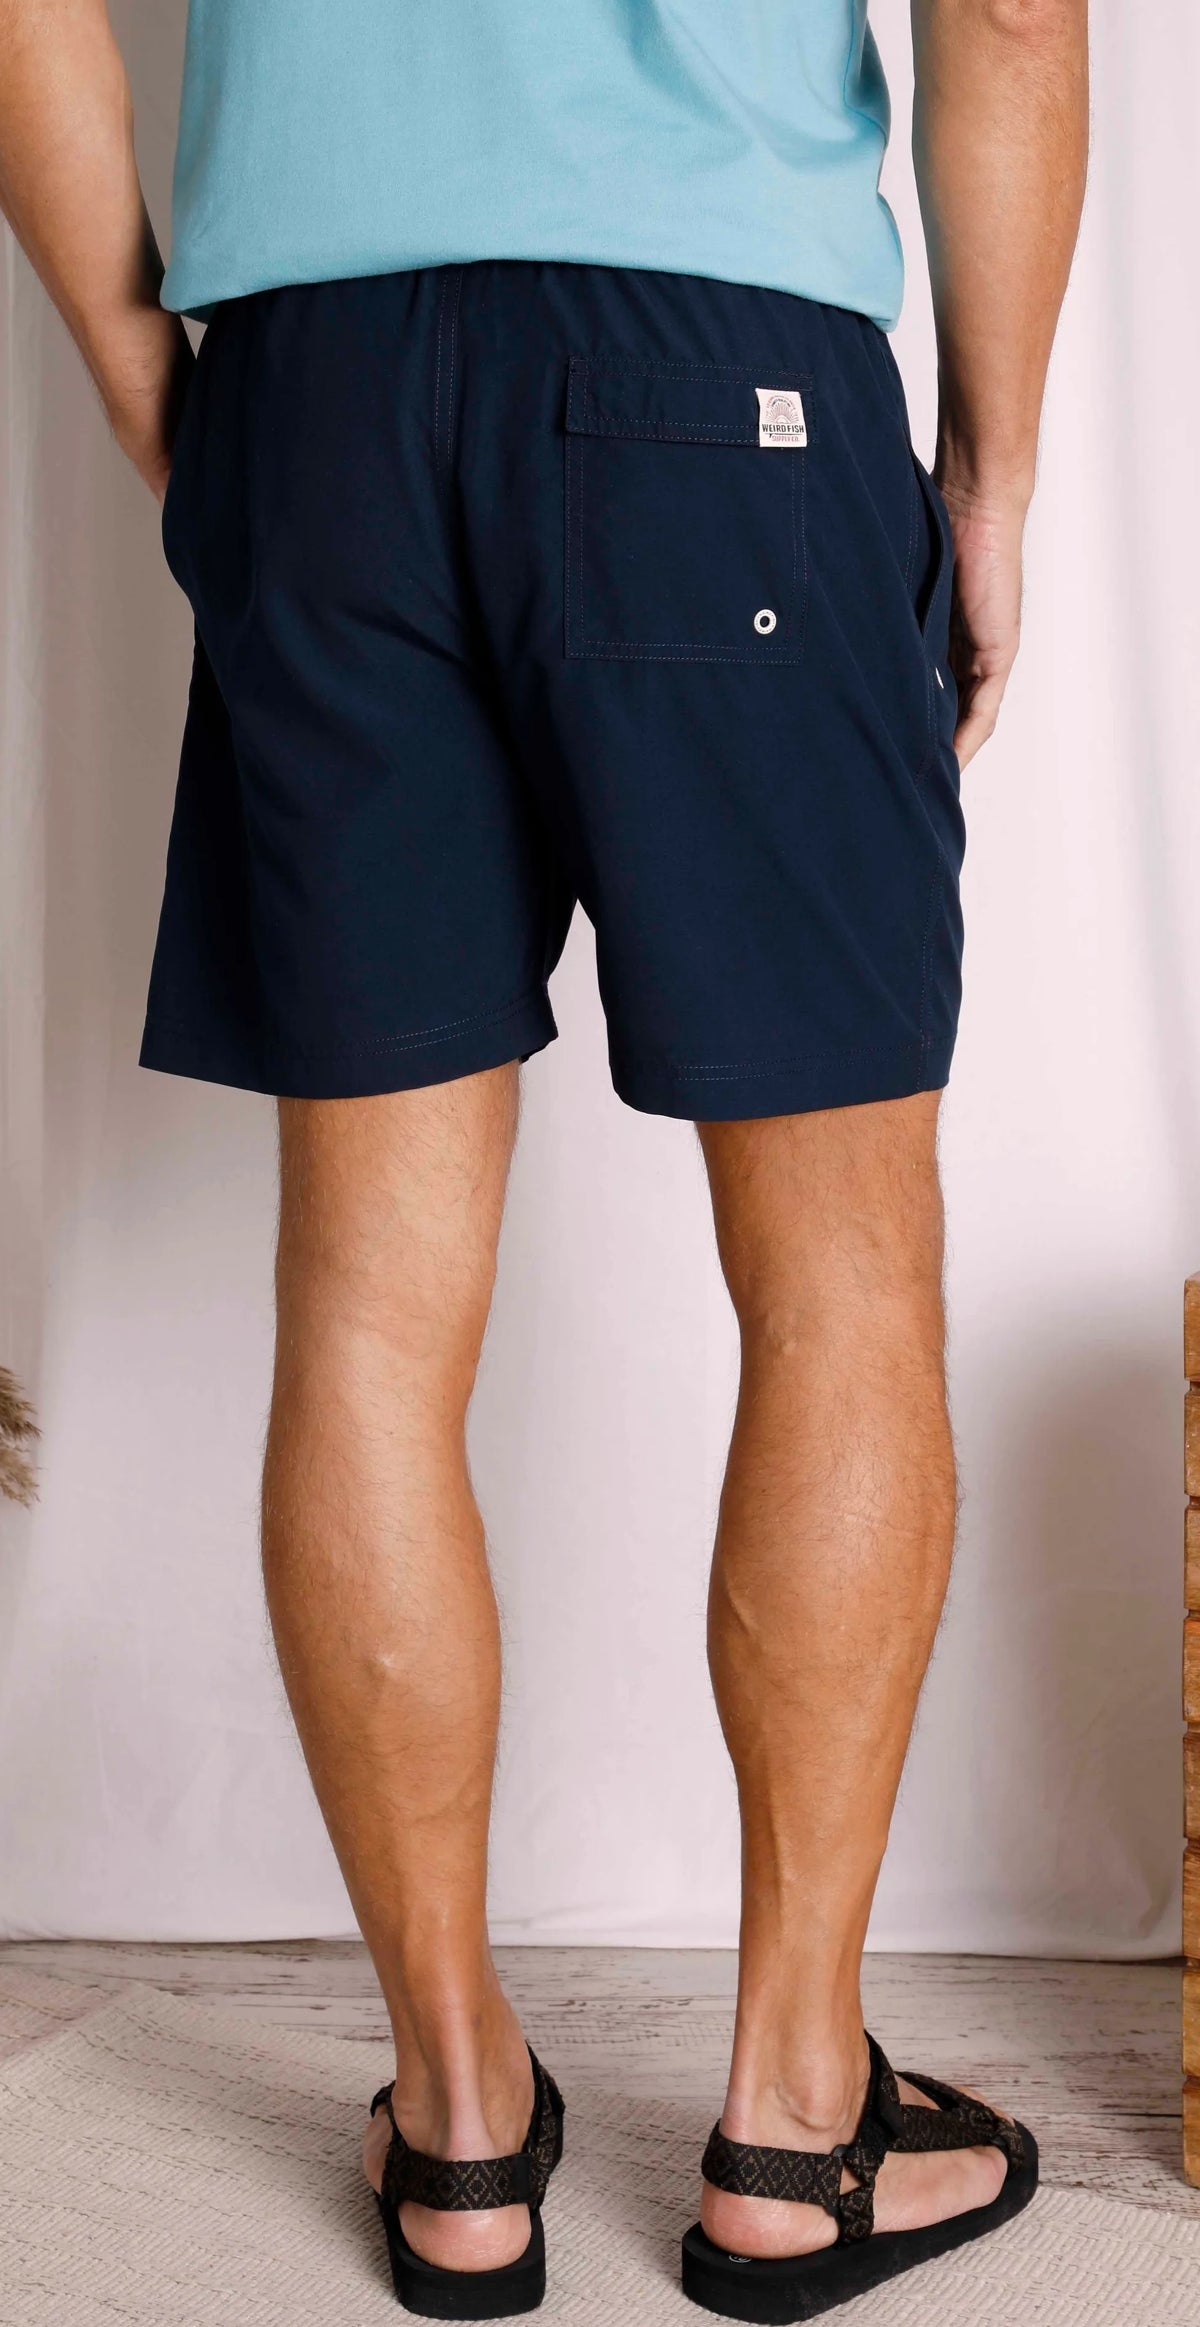 Weird Fish men's Banning swim shorts in Navy with Velcro back pocket.